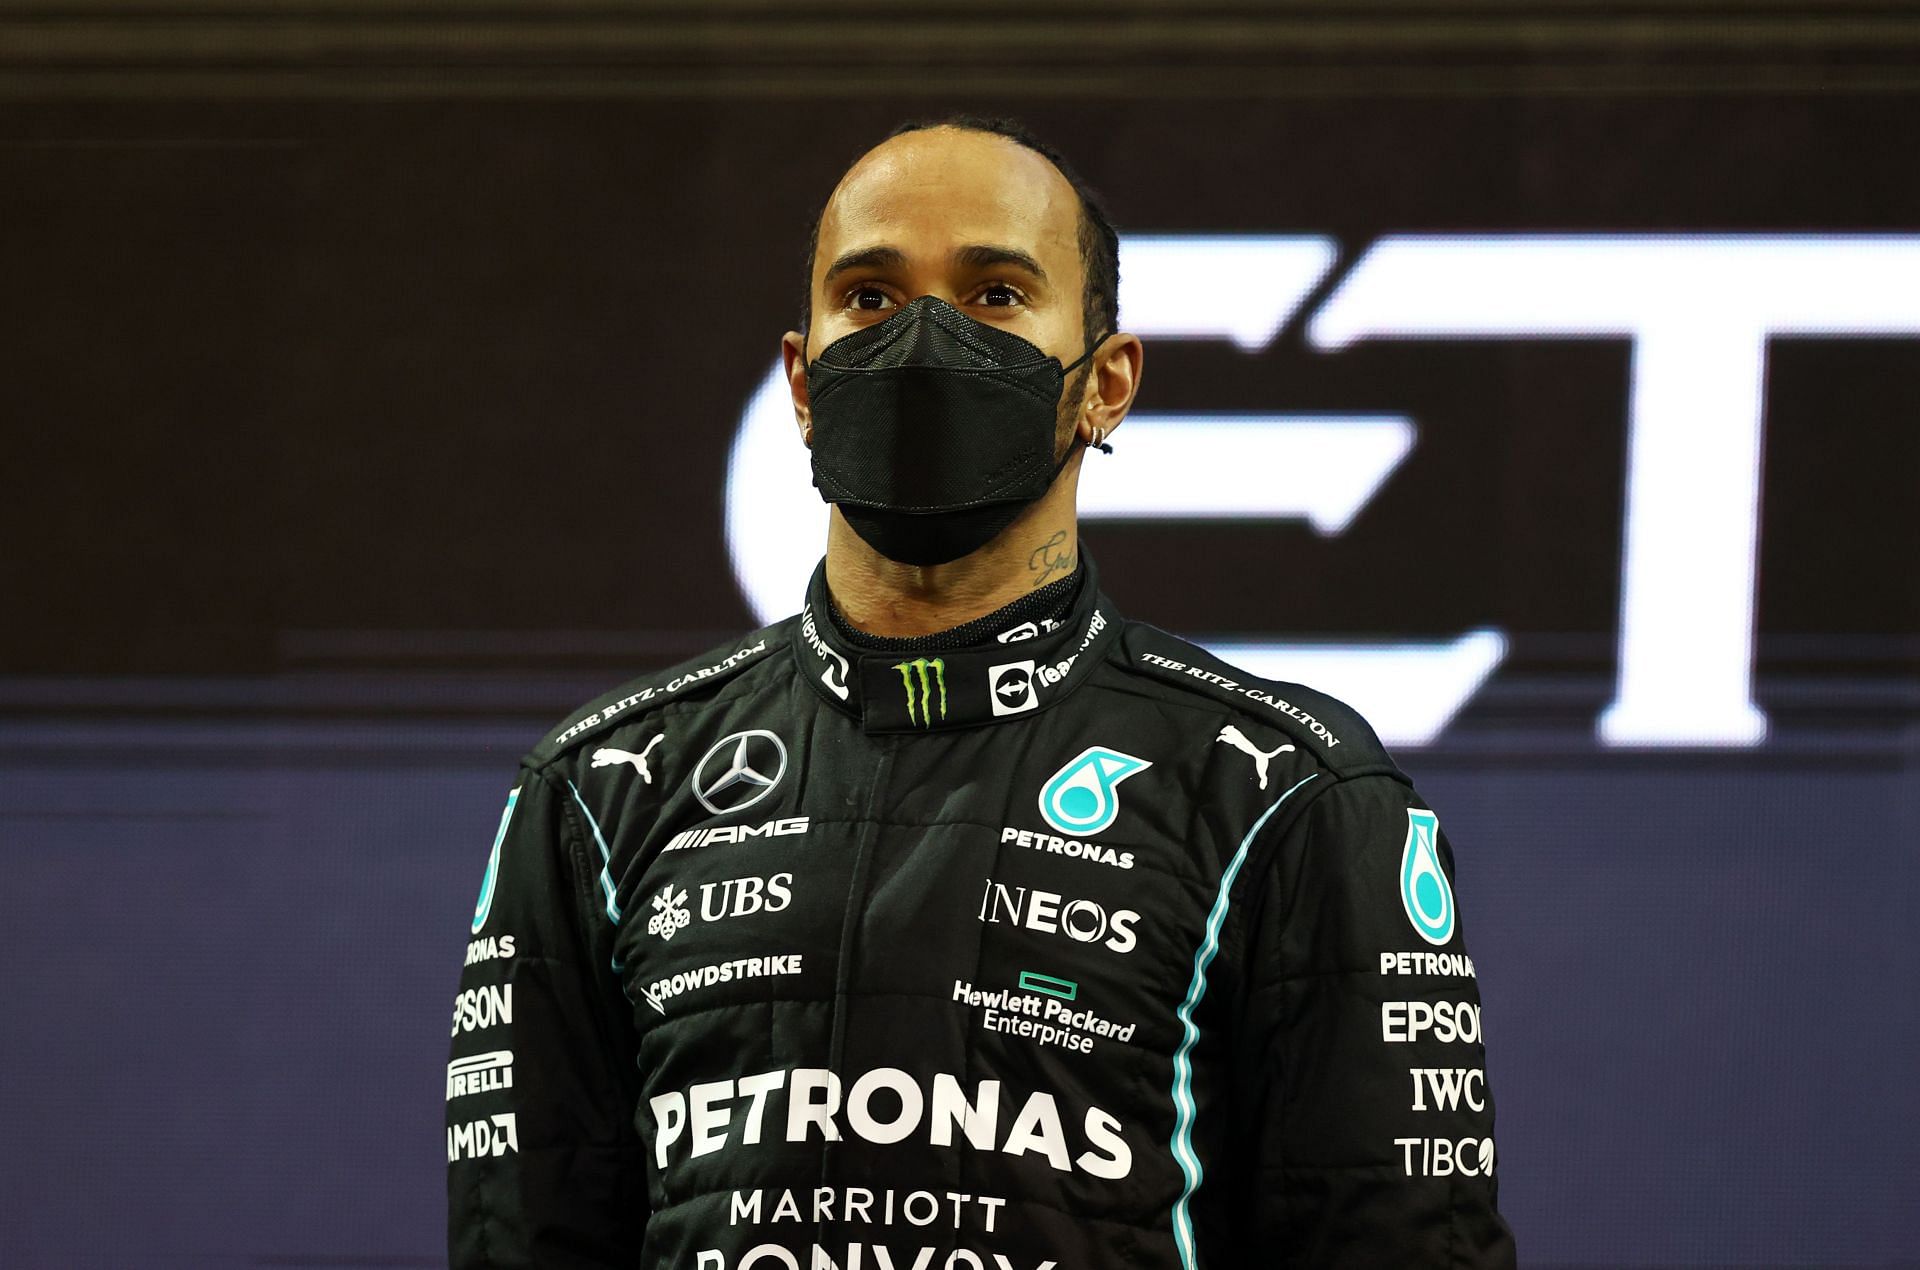 Second-placed Lewis Hamilton on the podium during the 2021 Abu Dhabi Grand Prix. (Photo by Bryn Lennon/Getty Images)